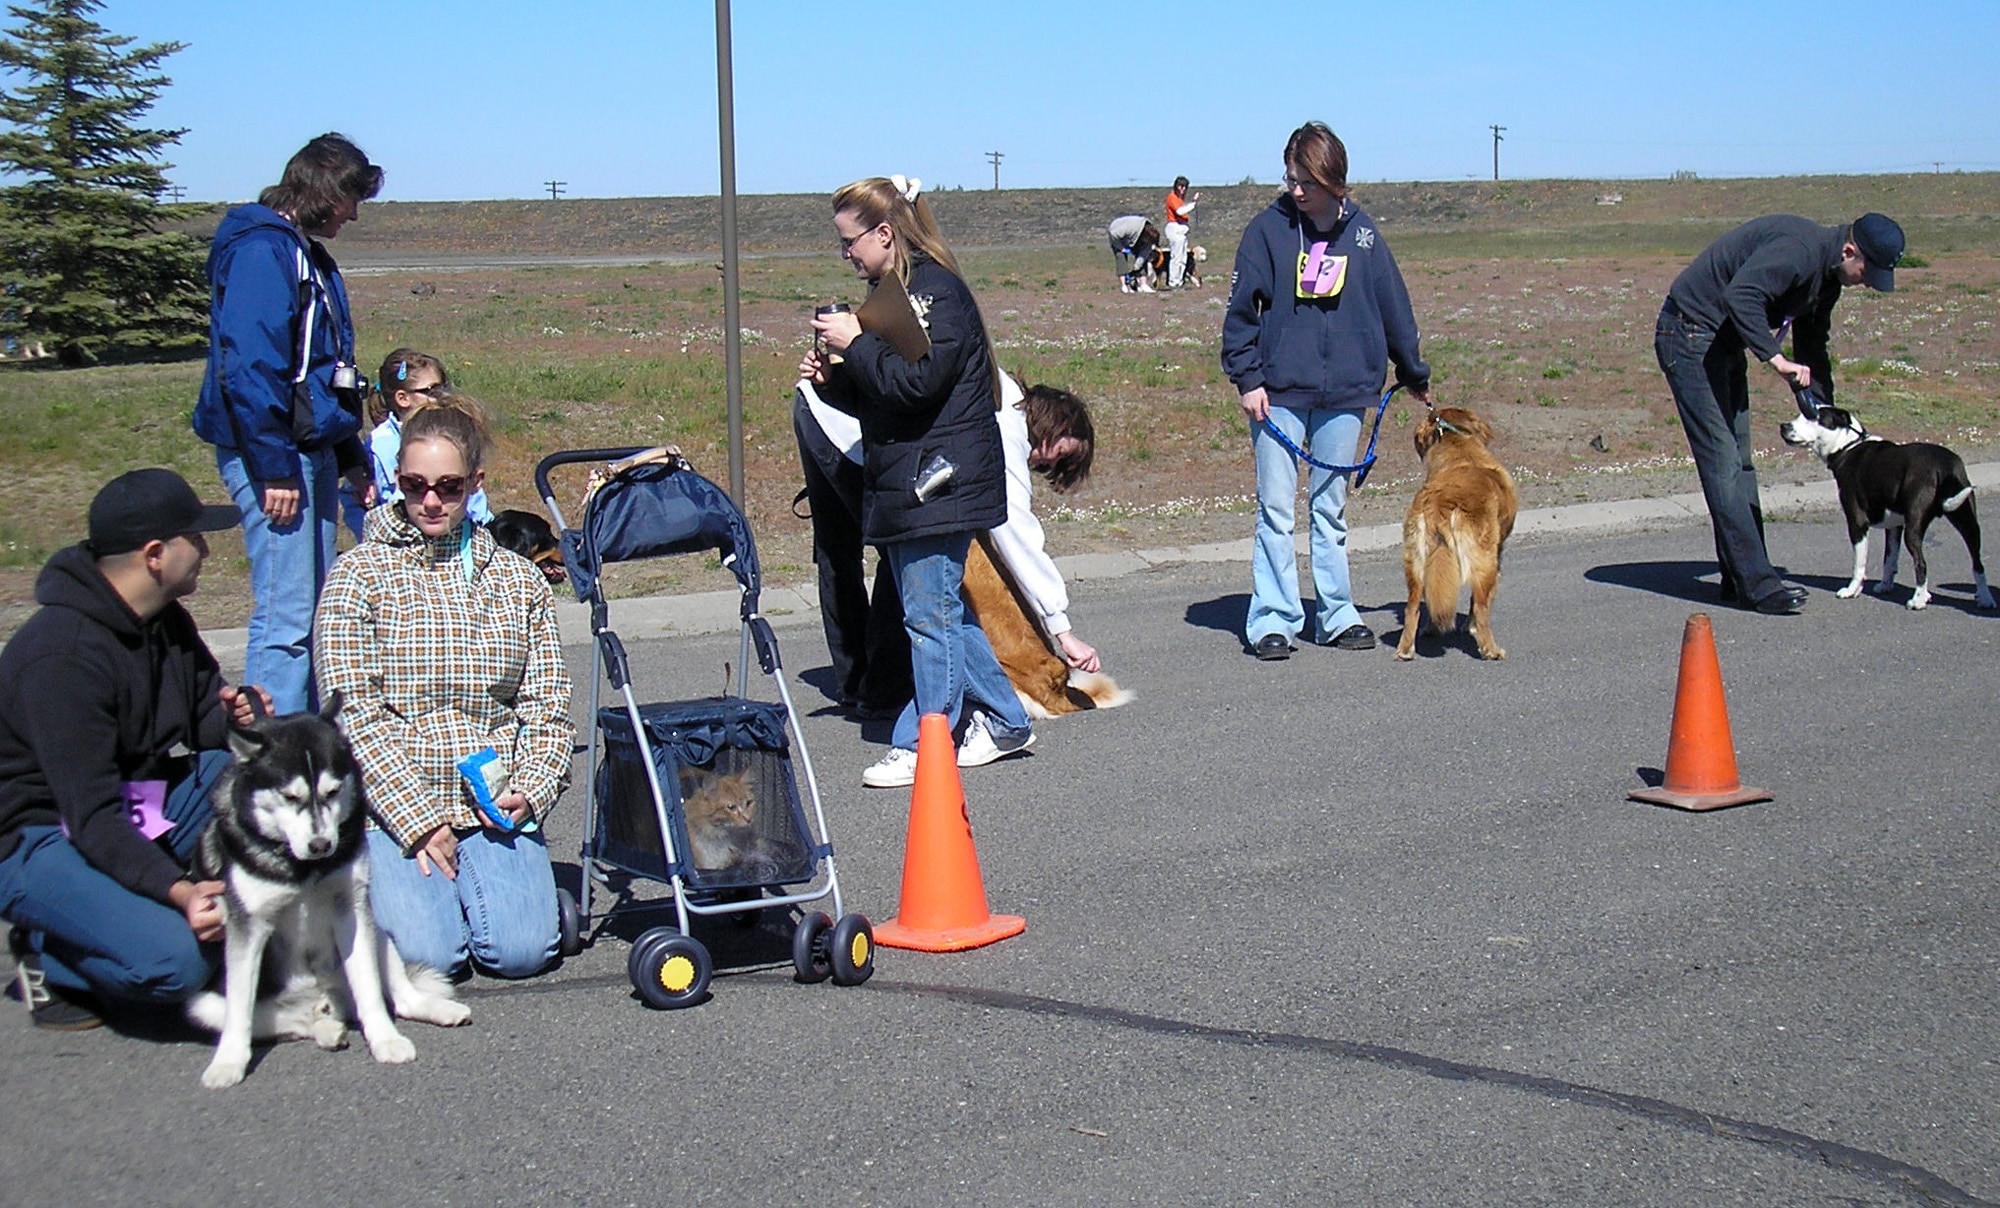 FAIRCHILD AIR FORCE BASE, Wash. – Owners of dogs in the canine 51-99 lbs category wait for their turn to show their animals at the Base Exchange pet show May 5. (Photo by Stephani Edington)
